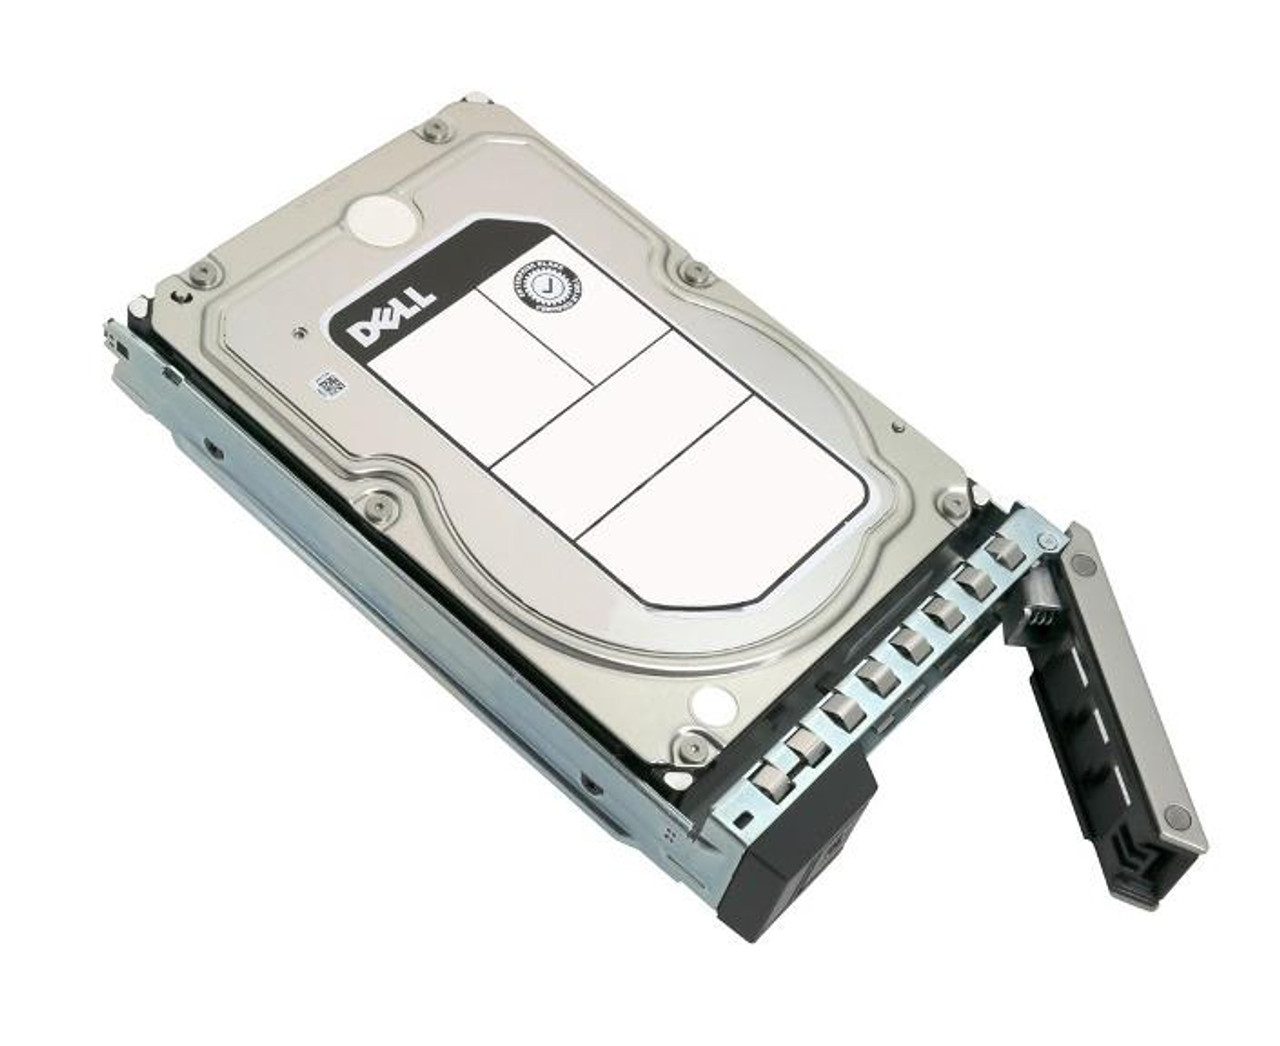 0HV5CH Dell 10TB 7200RPM SAS 12Gbps Nearline Hot Swap (ISE / 512e) 3.5-inch Internal Hard Drive with Tray